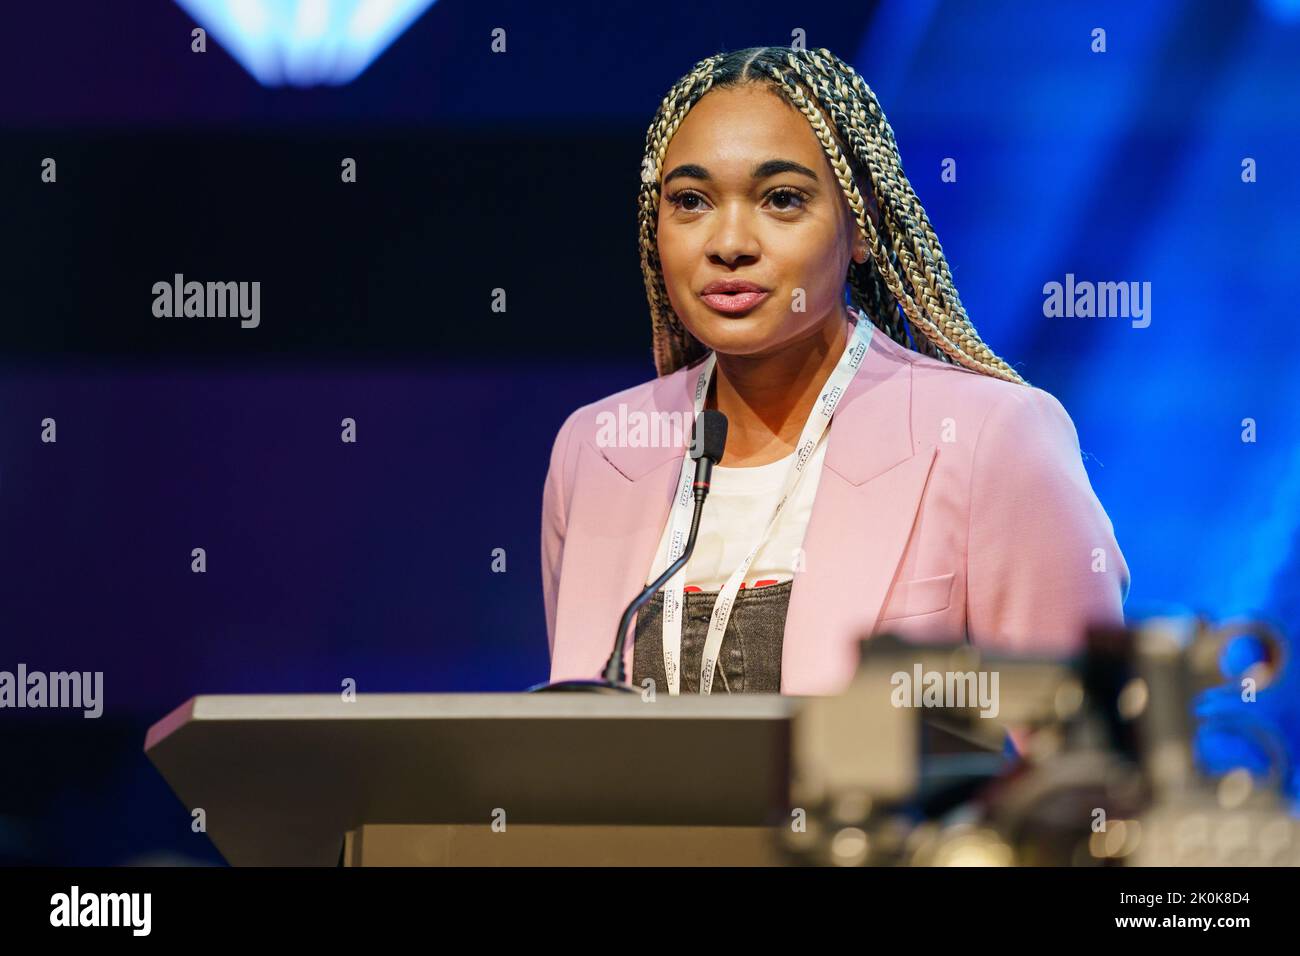 Alice Dearing, Olympian and Gamer gives a speech at The Forum during the Commonwealth Esports Championships at the Birmingham ICC, UK. Credit: Ben Que Stock Photo